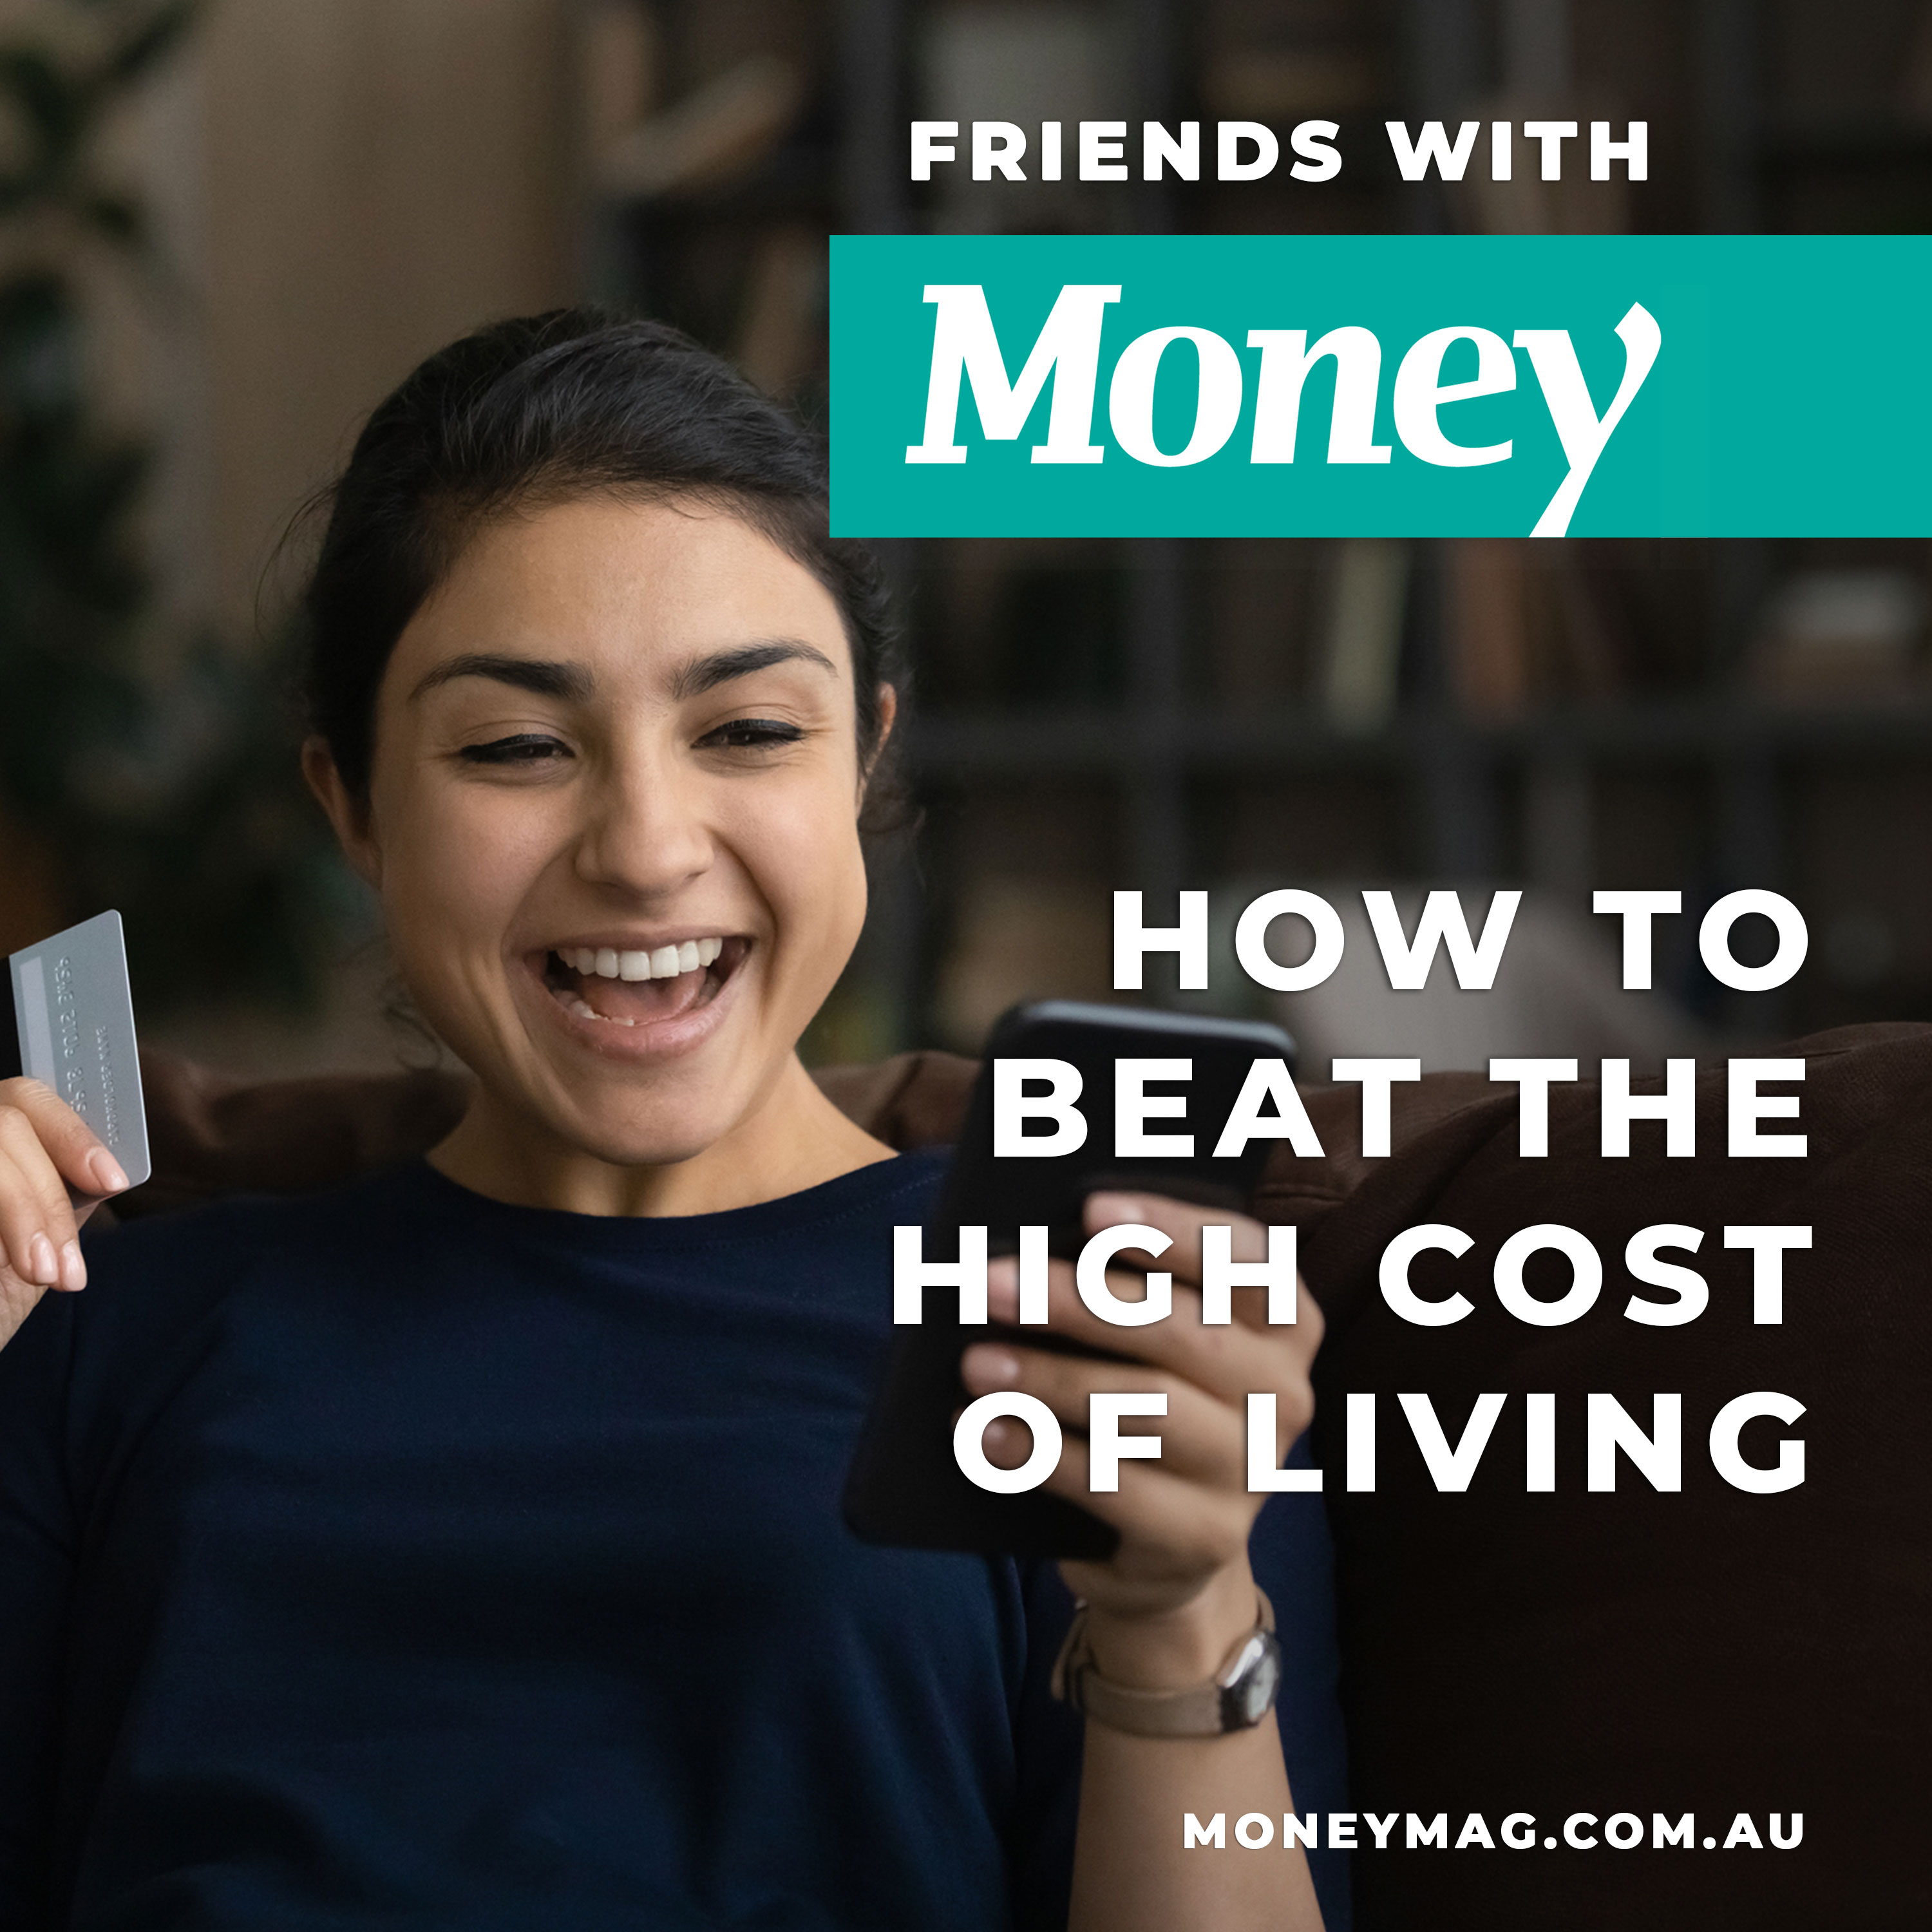 How to beat the high cost of living